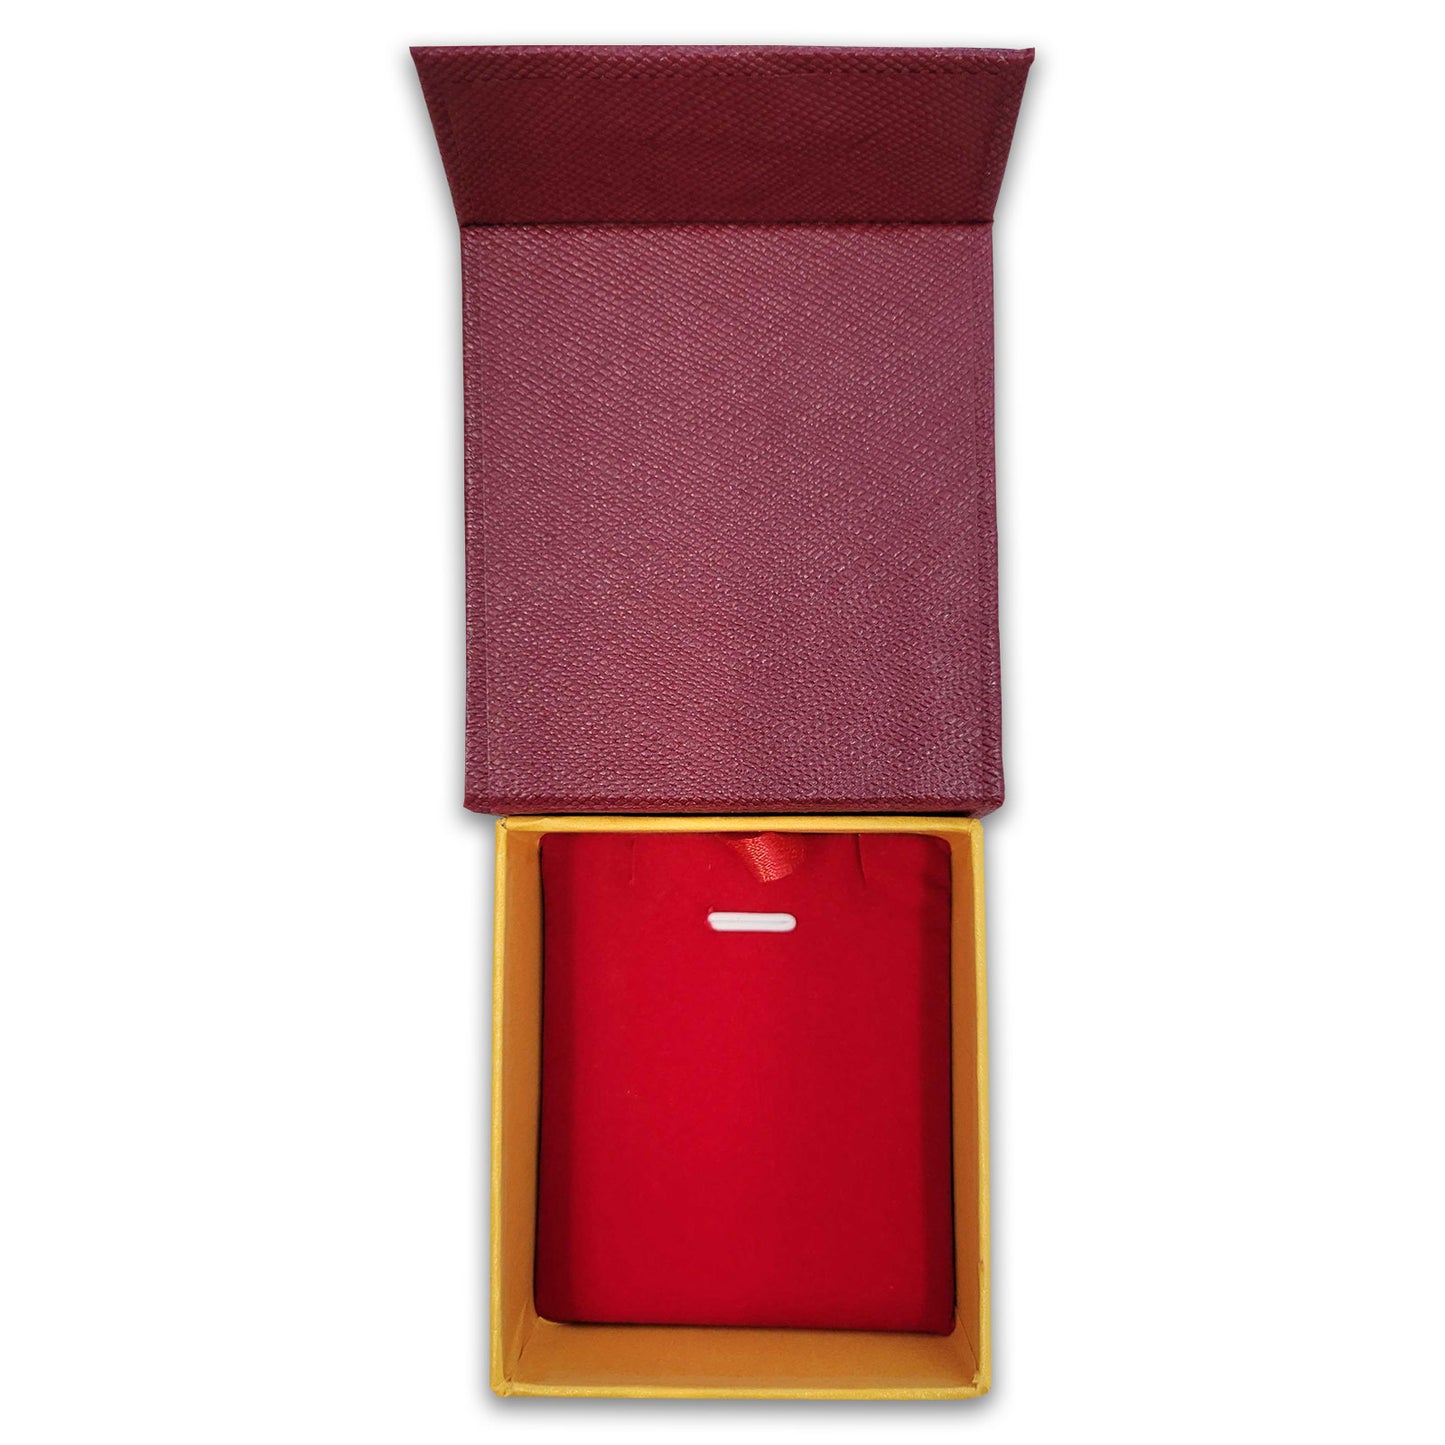 3" x 2 3/4" Maroon Textured Pendant/Necklace Jewelry Box with Magnetic Closure (22 Pack)